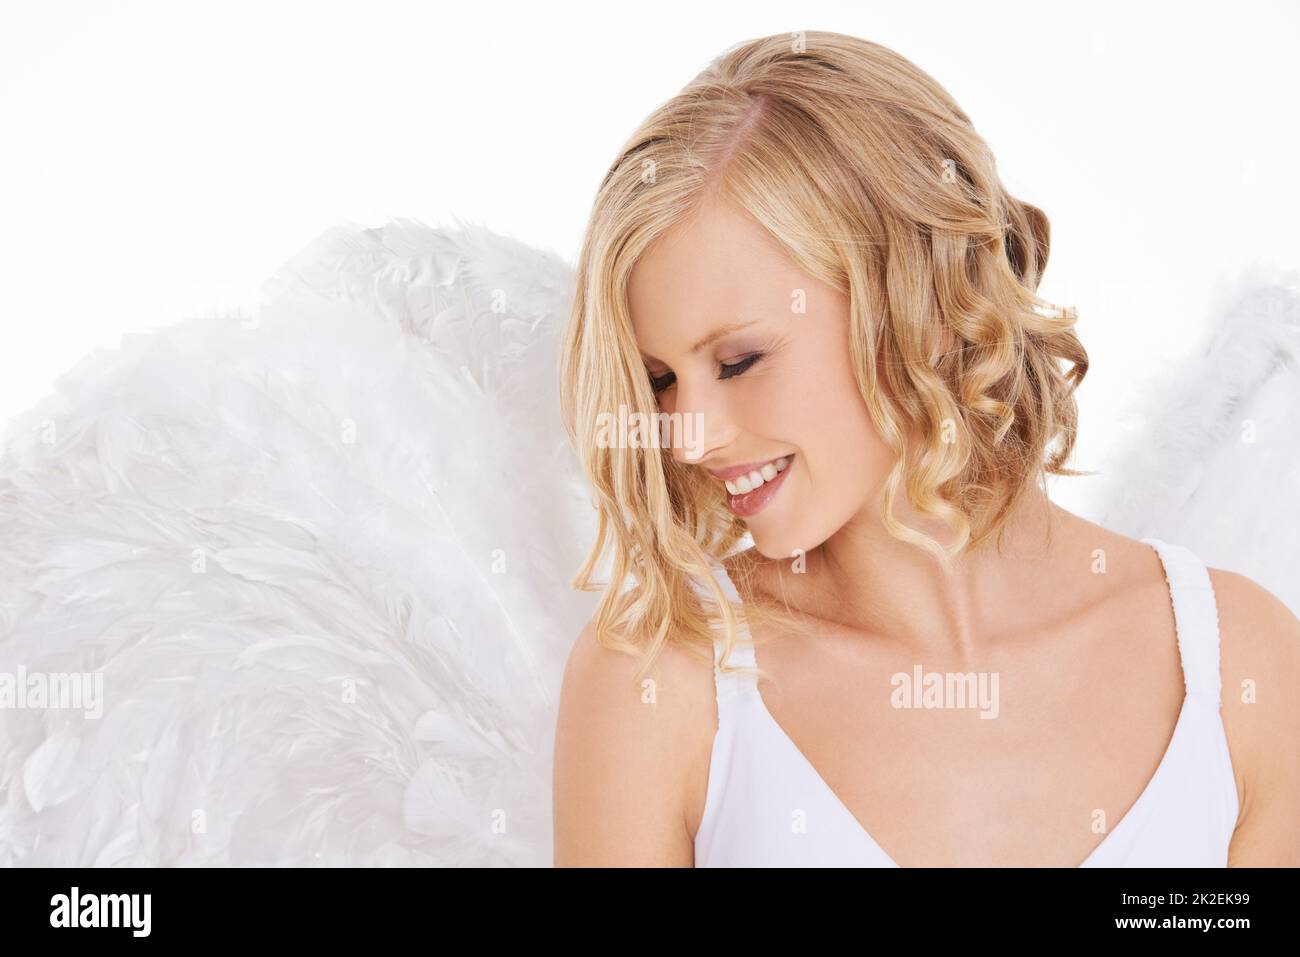 Her beauty is luminous. Studio shot of a young woman in angel wings isolated on white. Stock Photo